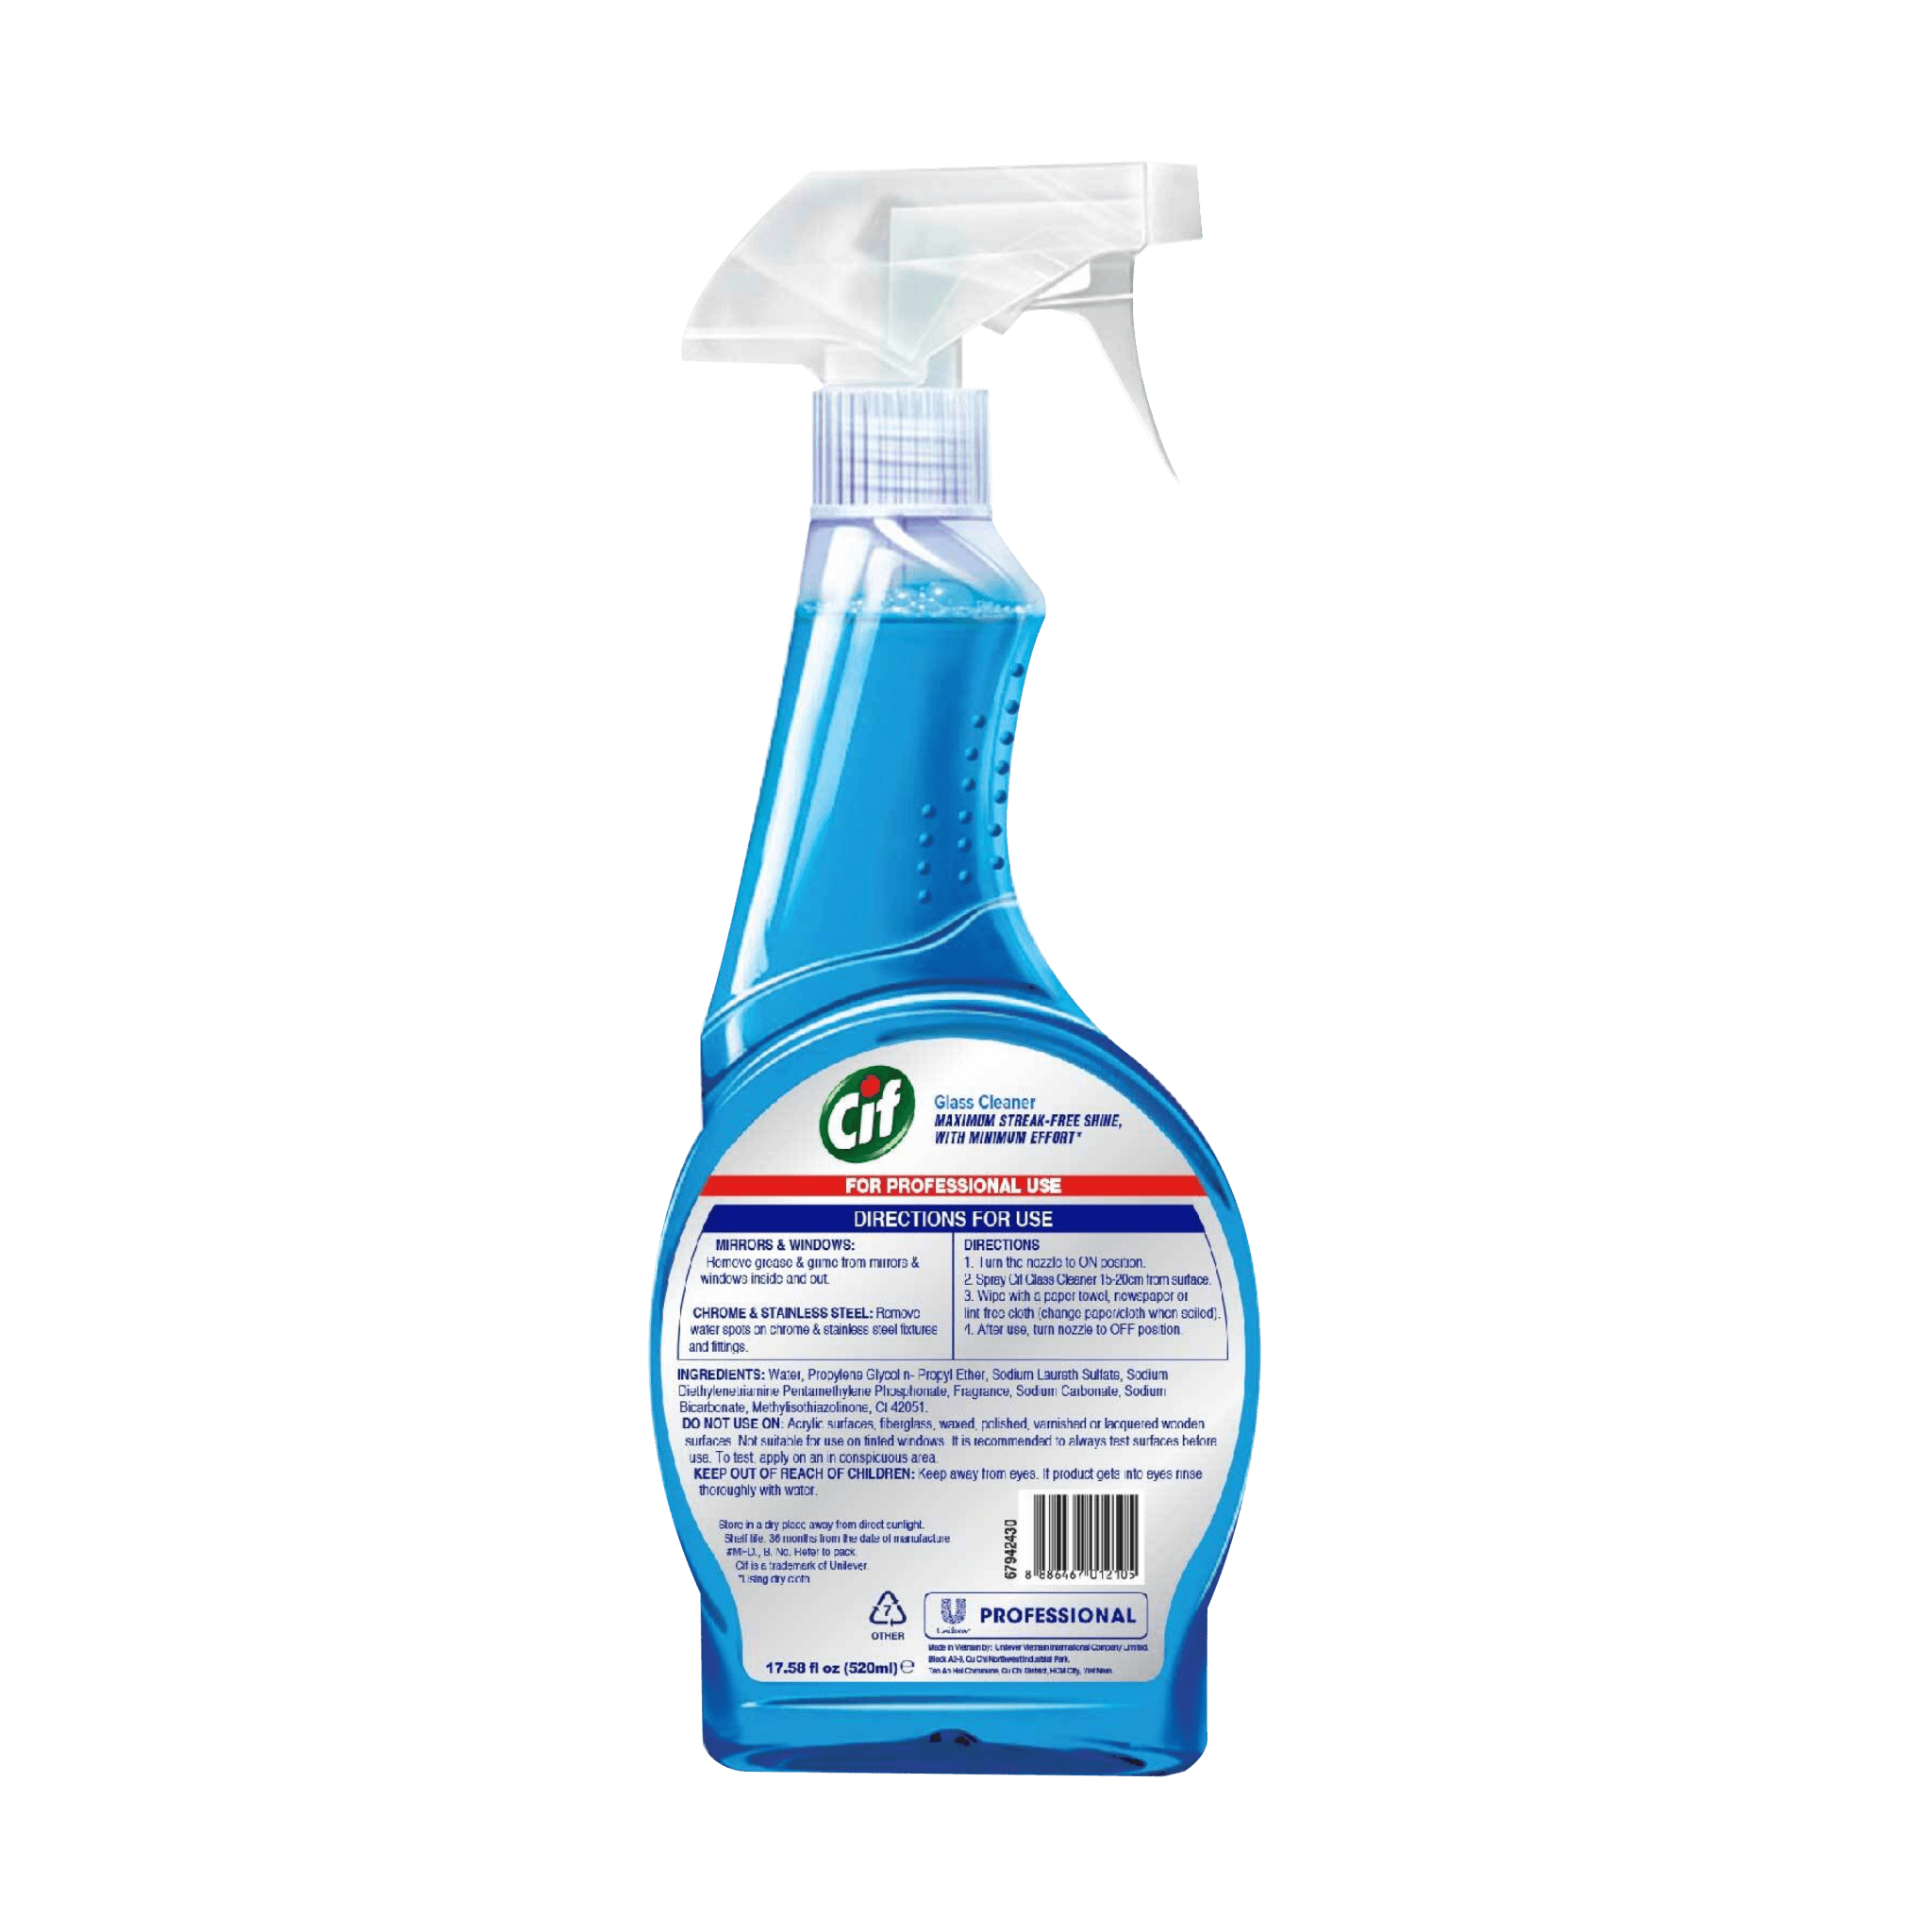 SALE- Buy 1 FREE 1 Cif Glass cleaner 520ml - Unilever Professional Philippines